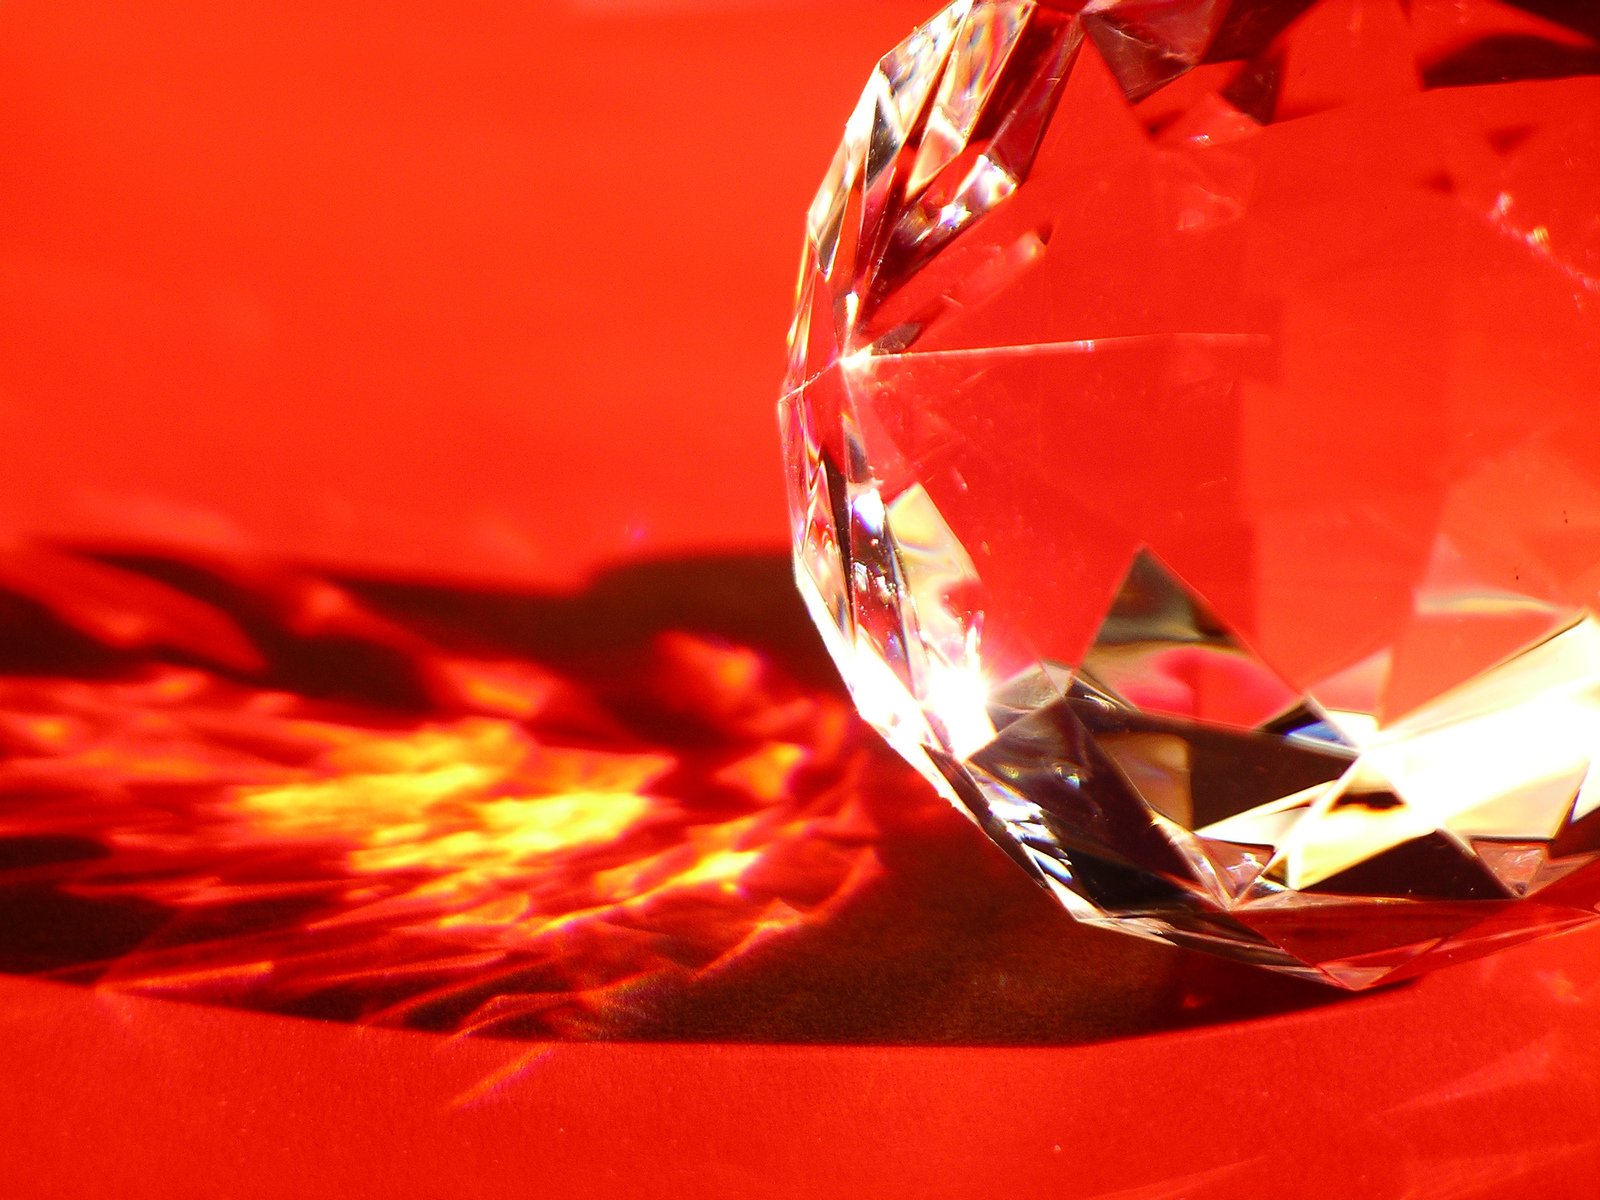 red glass object sitting in the sun light